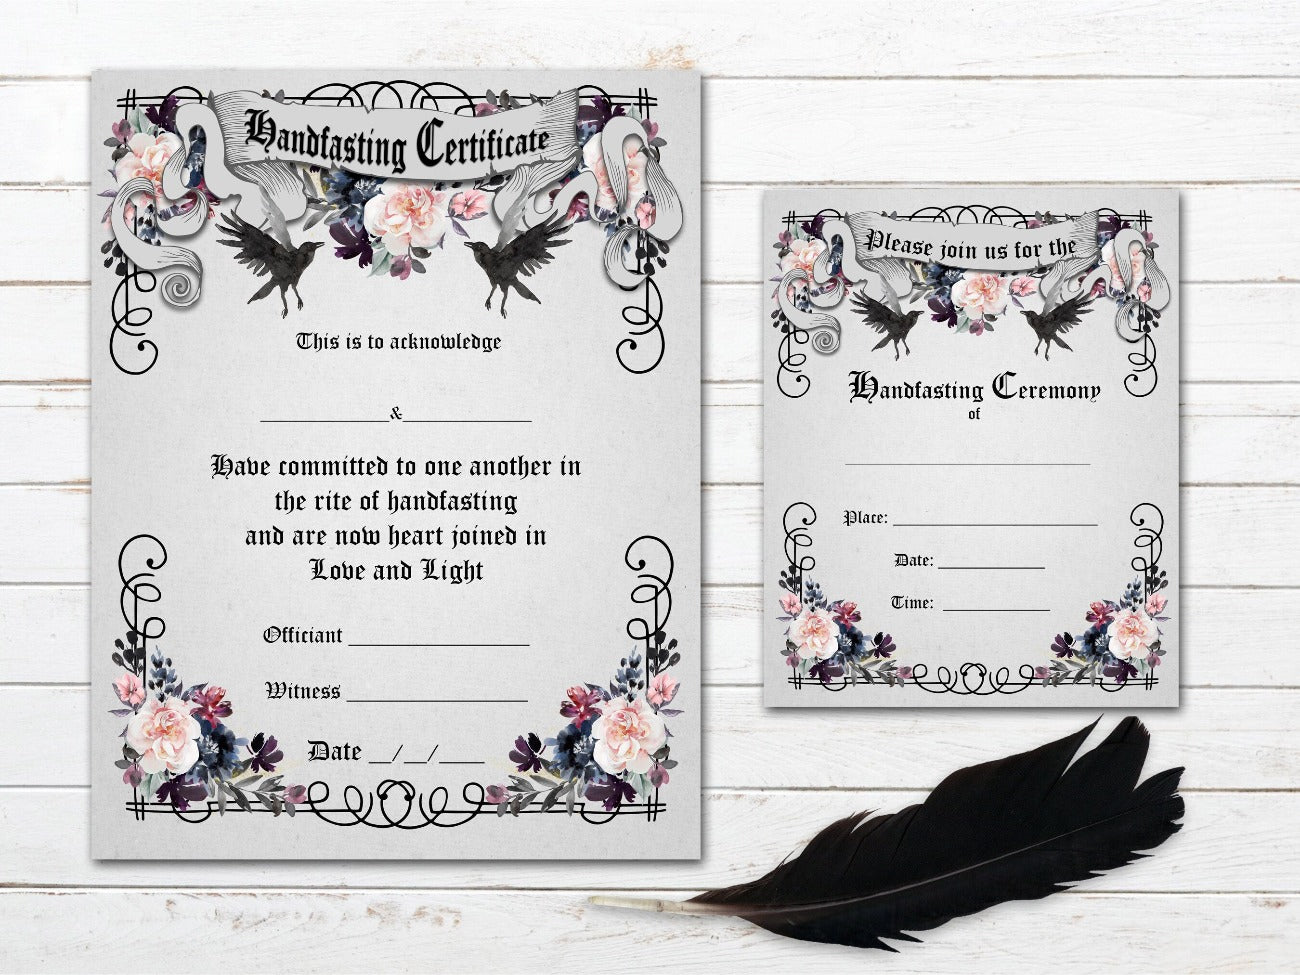 Ravens Handfasting Certificate and Invitation shown with the optional grey background.